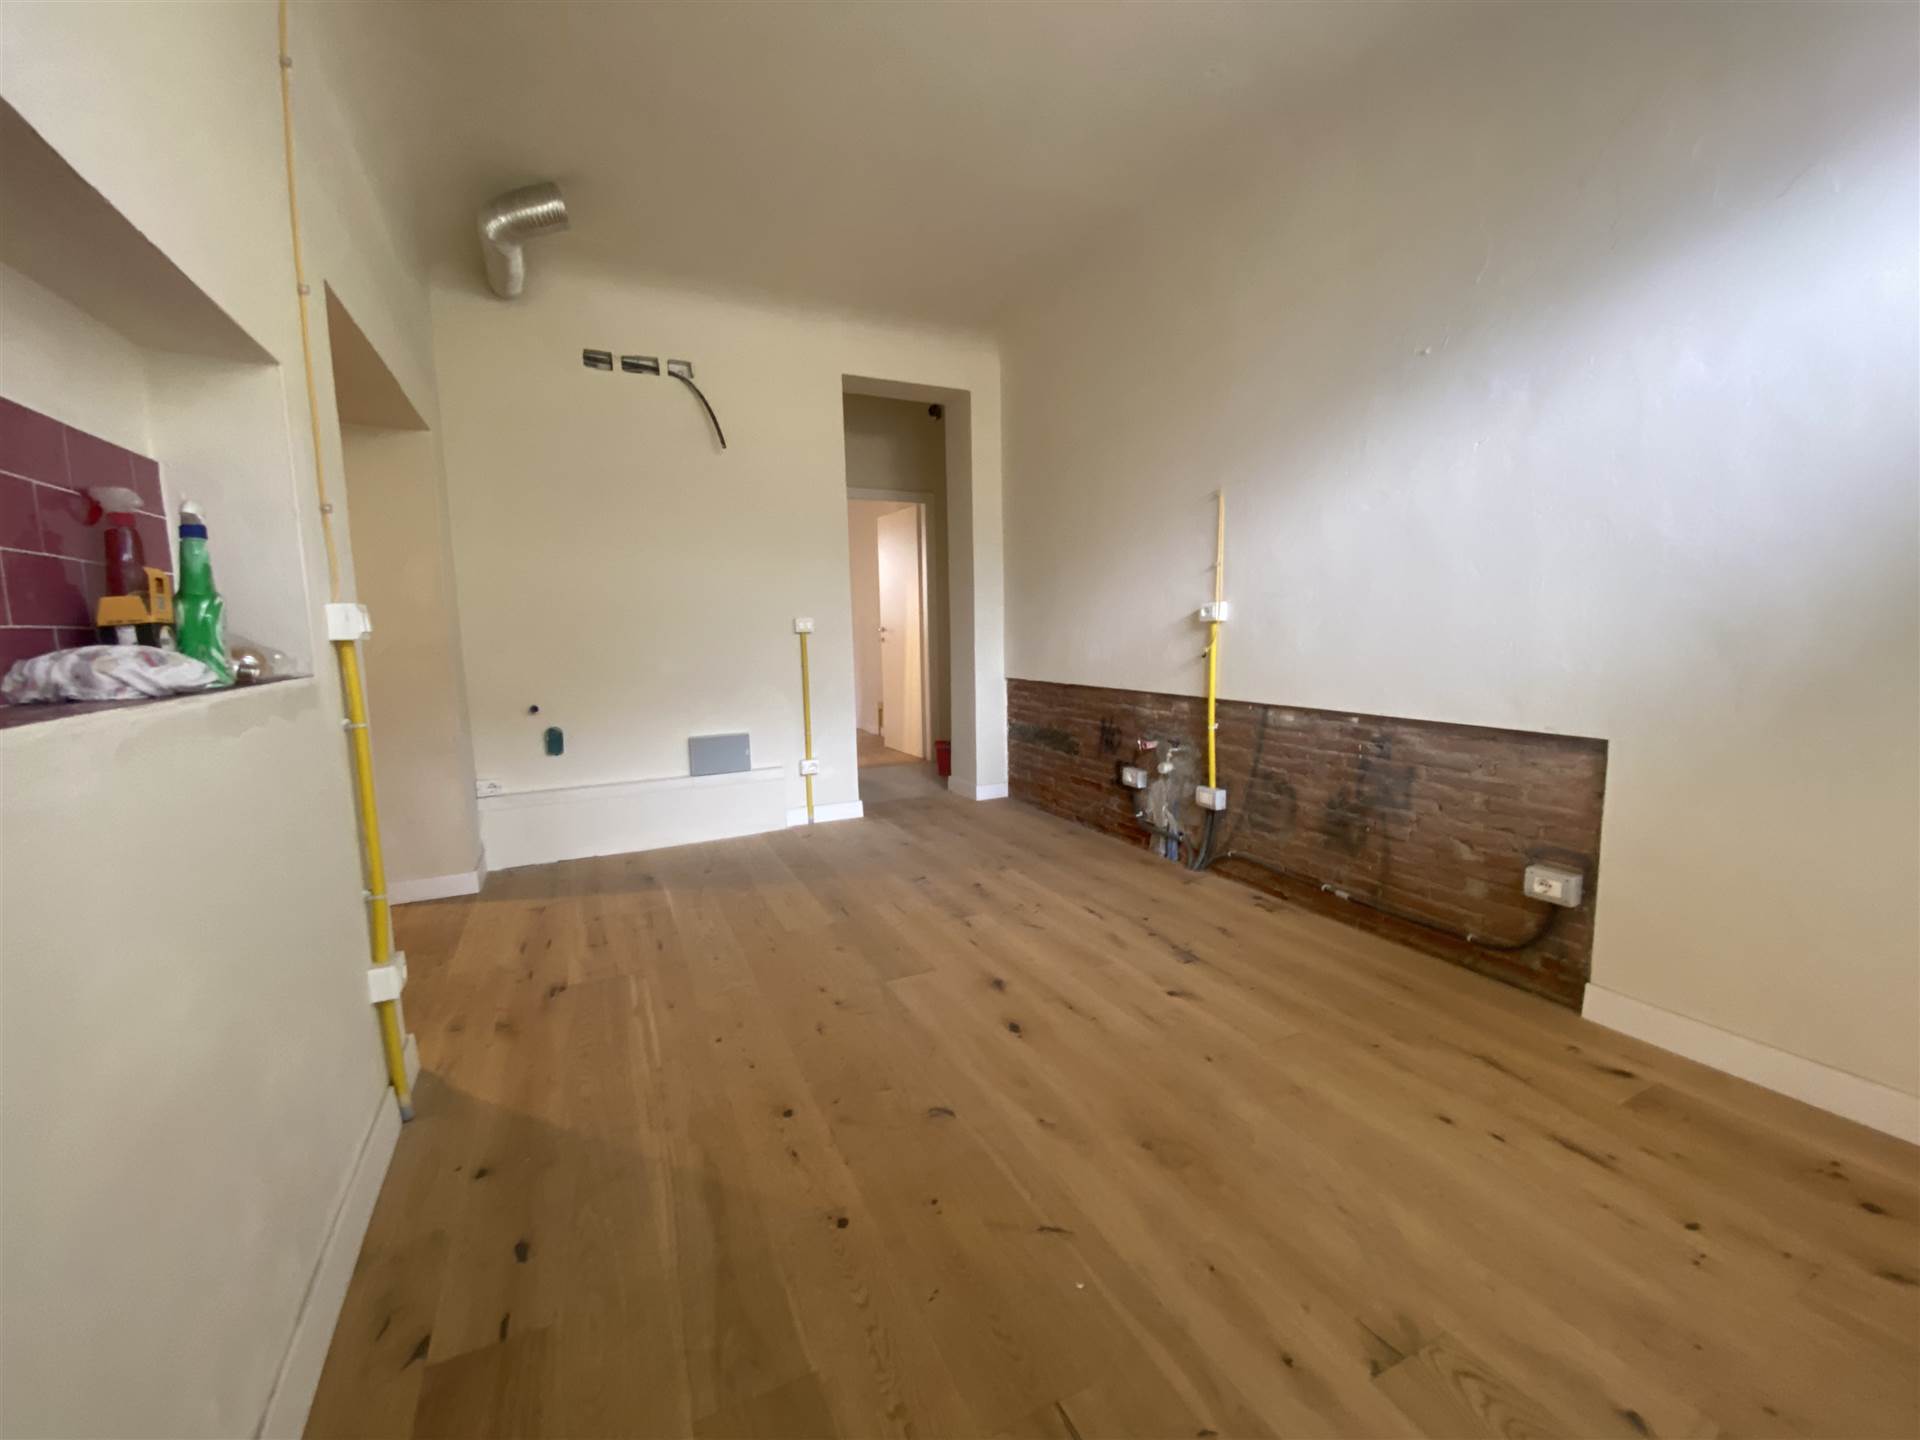 OLTRARNO, FIRENZE, Apartment for sale of 60 Sq. mt., Restored, Heating Individual heating system, Energetic class: G, Epi: 175 kwh/m2 year, placed at 